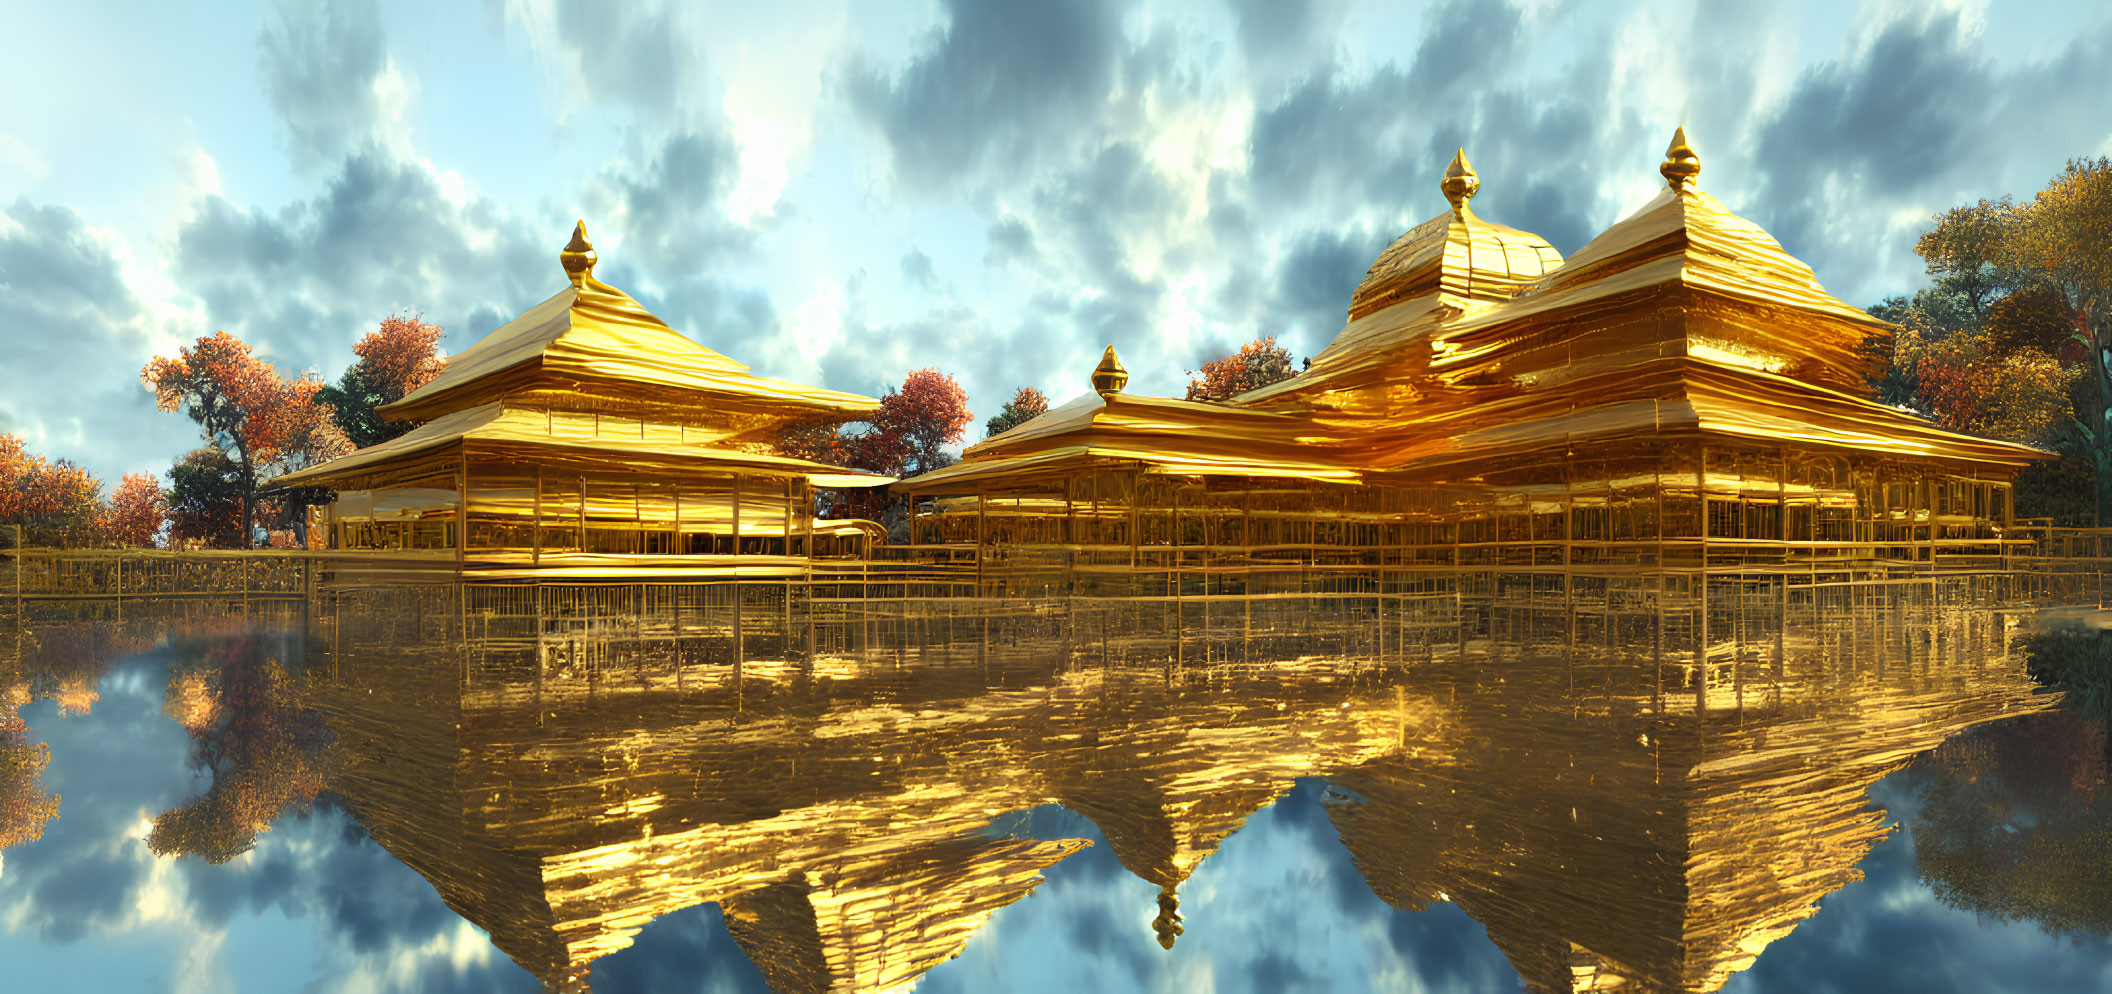 Golden Pagodas Reflecting in Serene Water with Autumn Foliage